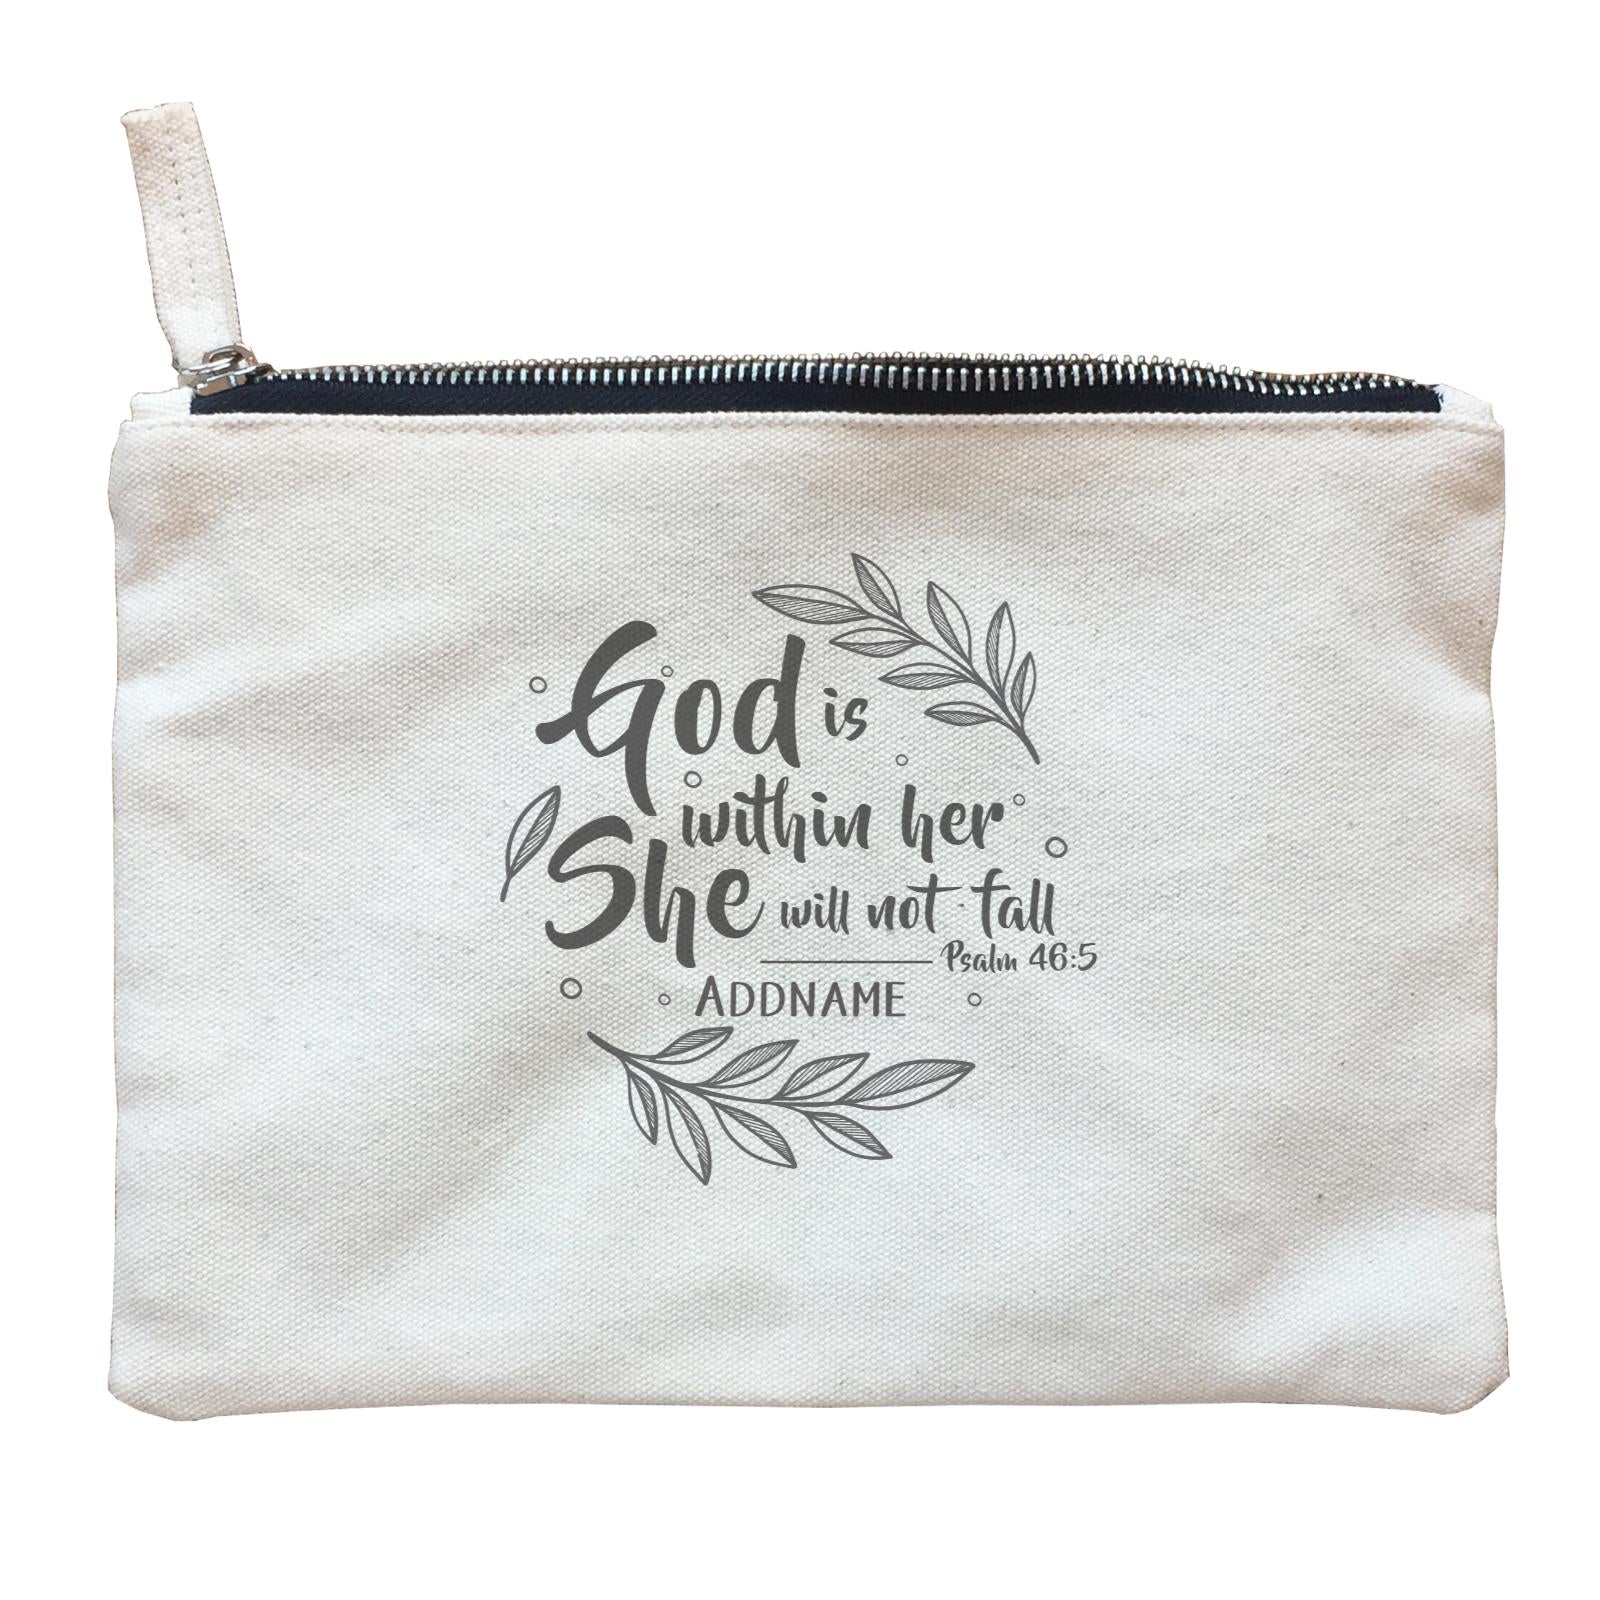 Christian For Her God is WIthin Her She Will Not Fall Psalm 46.5 Addname Zipper Pouch